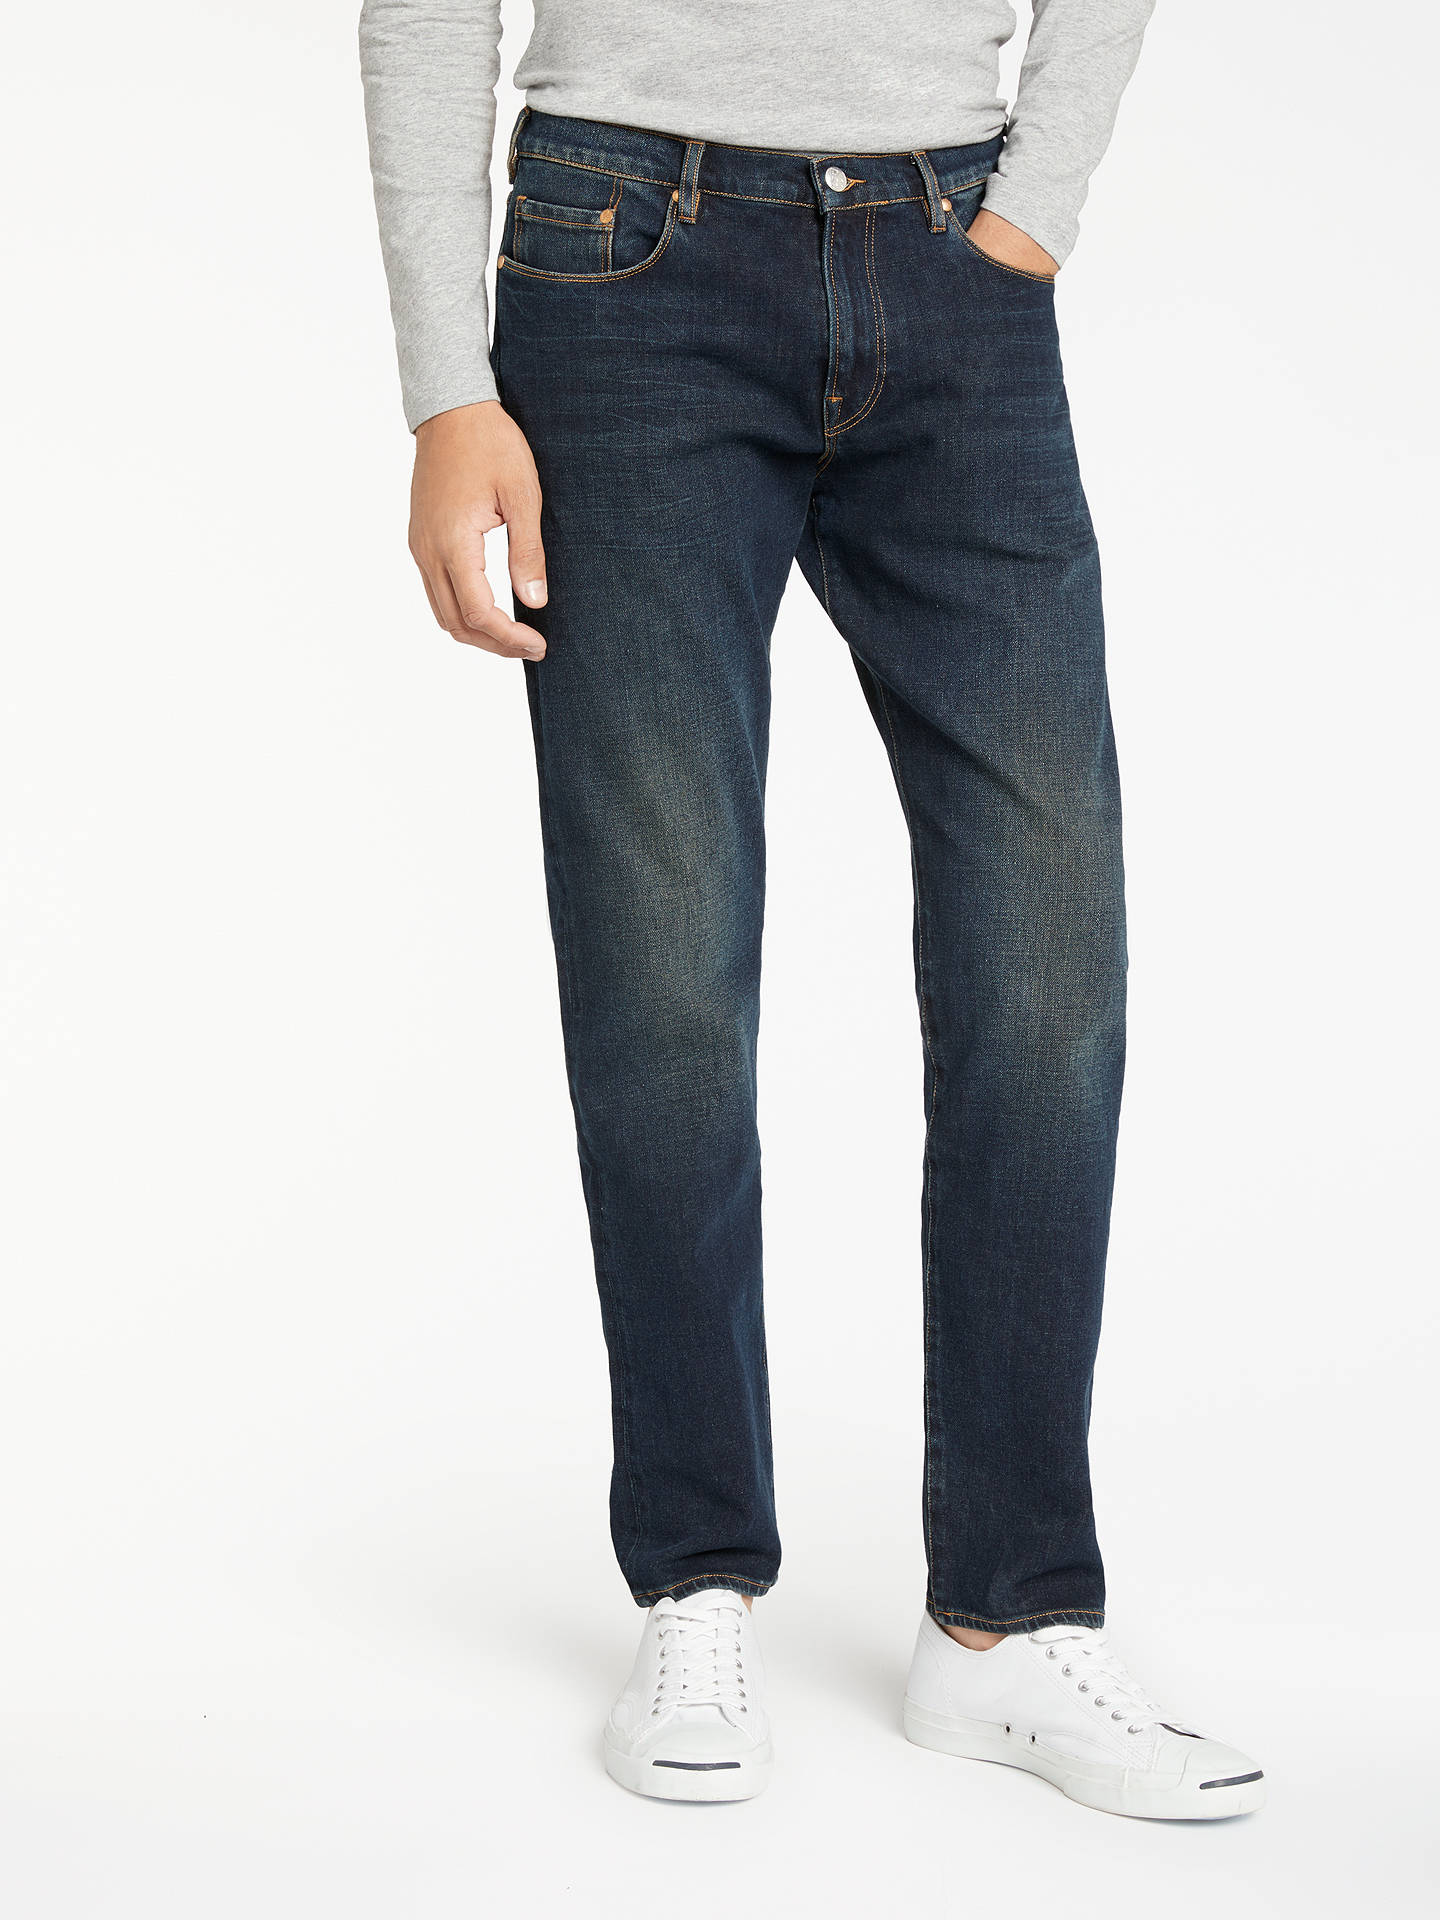 PS by Paul Smith Tapered Fit 4-Way Stretch Jeans, Dark Wash at John ...